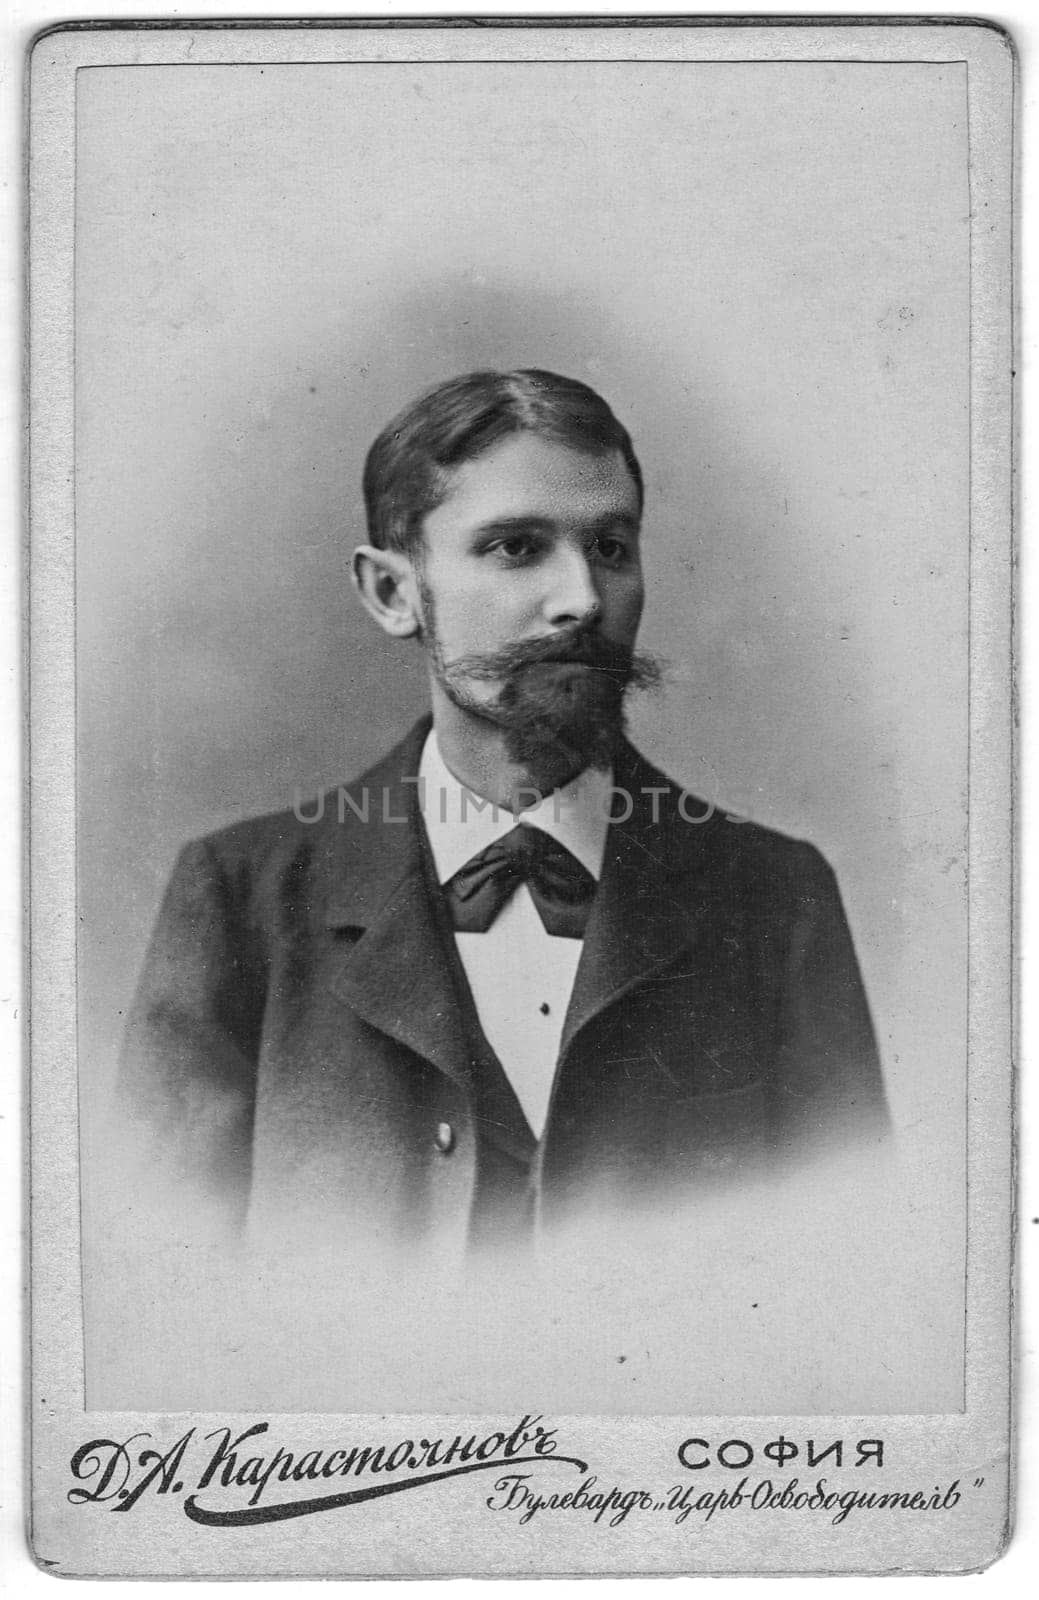 Vintage cabinet card shows portrait of the midle-aged man with moustache, full beard. Photo was taken in a photo studio. Edwardian era. by roman_nerud